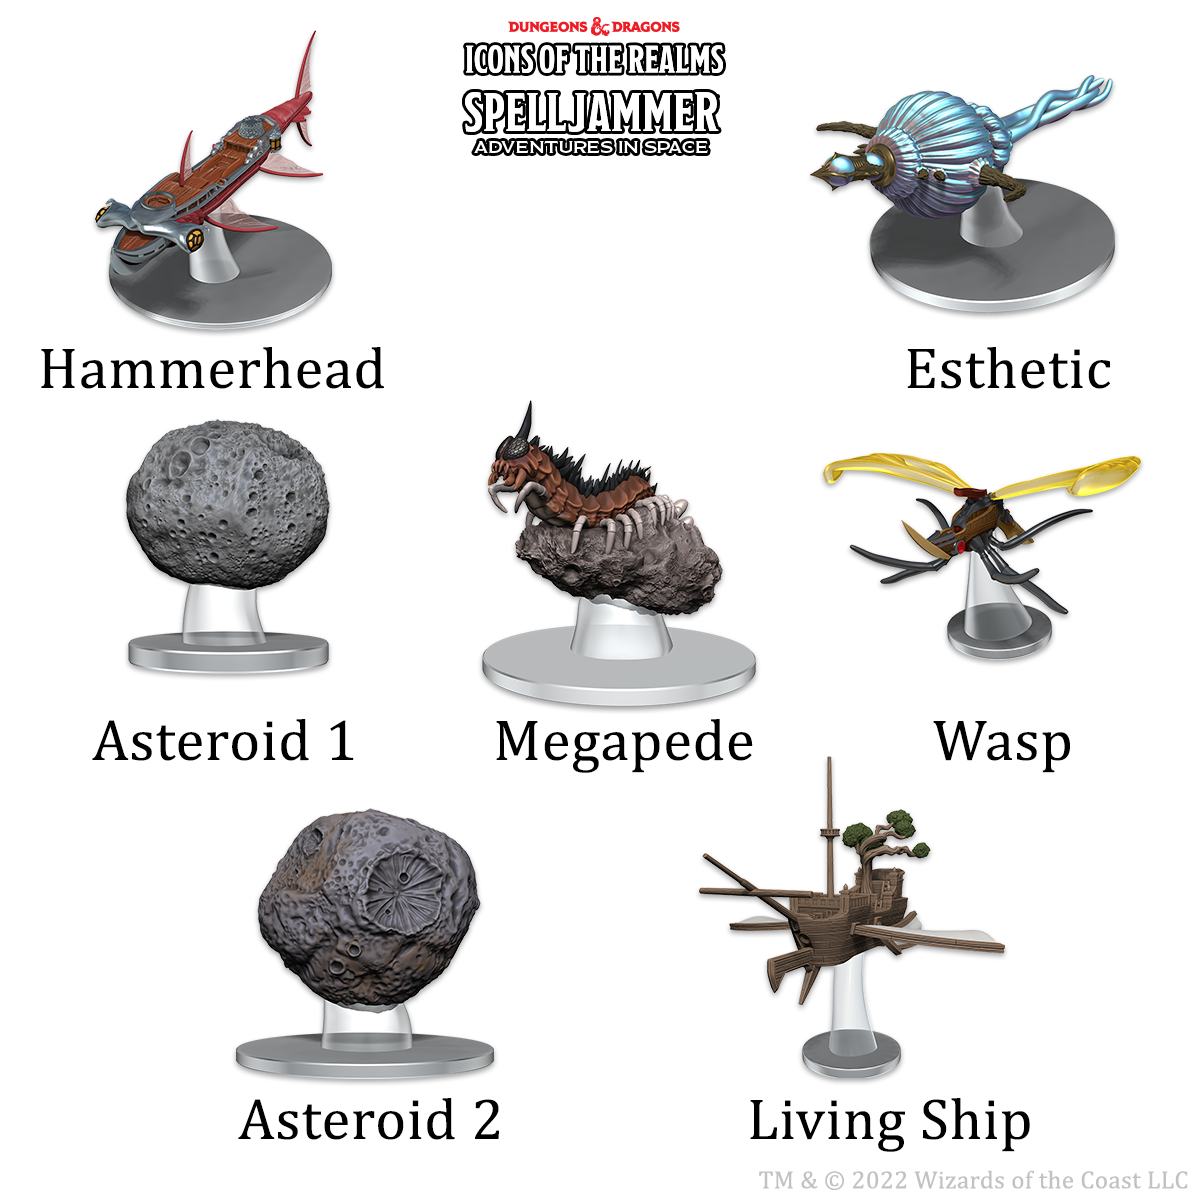 D&D Icons of the Realms: Spelljammer Adventures in Space: Asteroid Encounters Ship Scale  